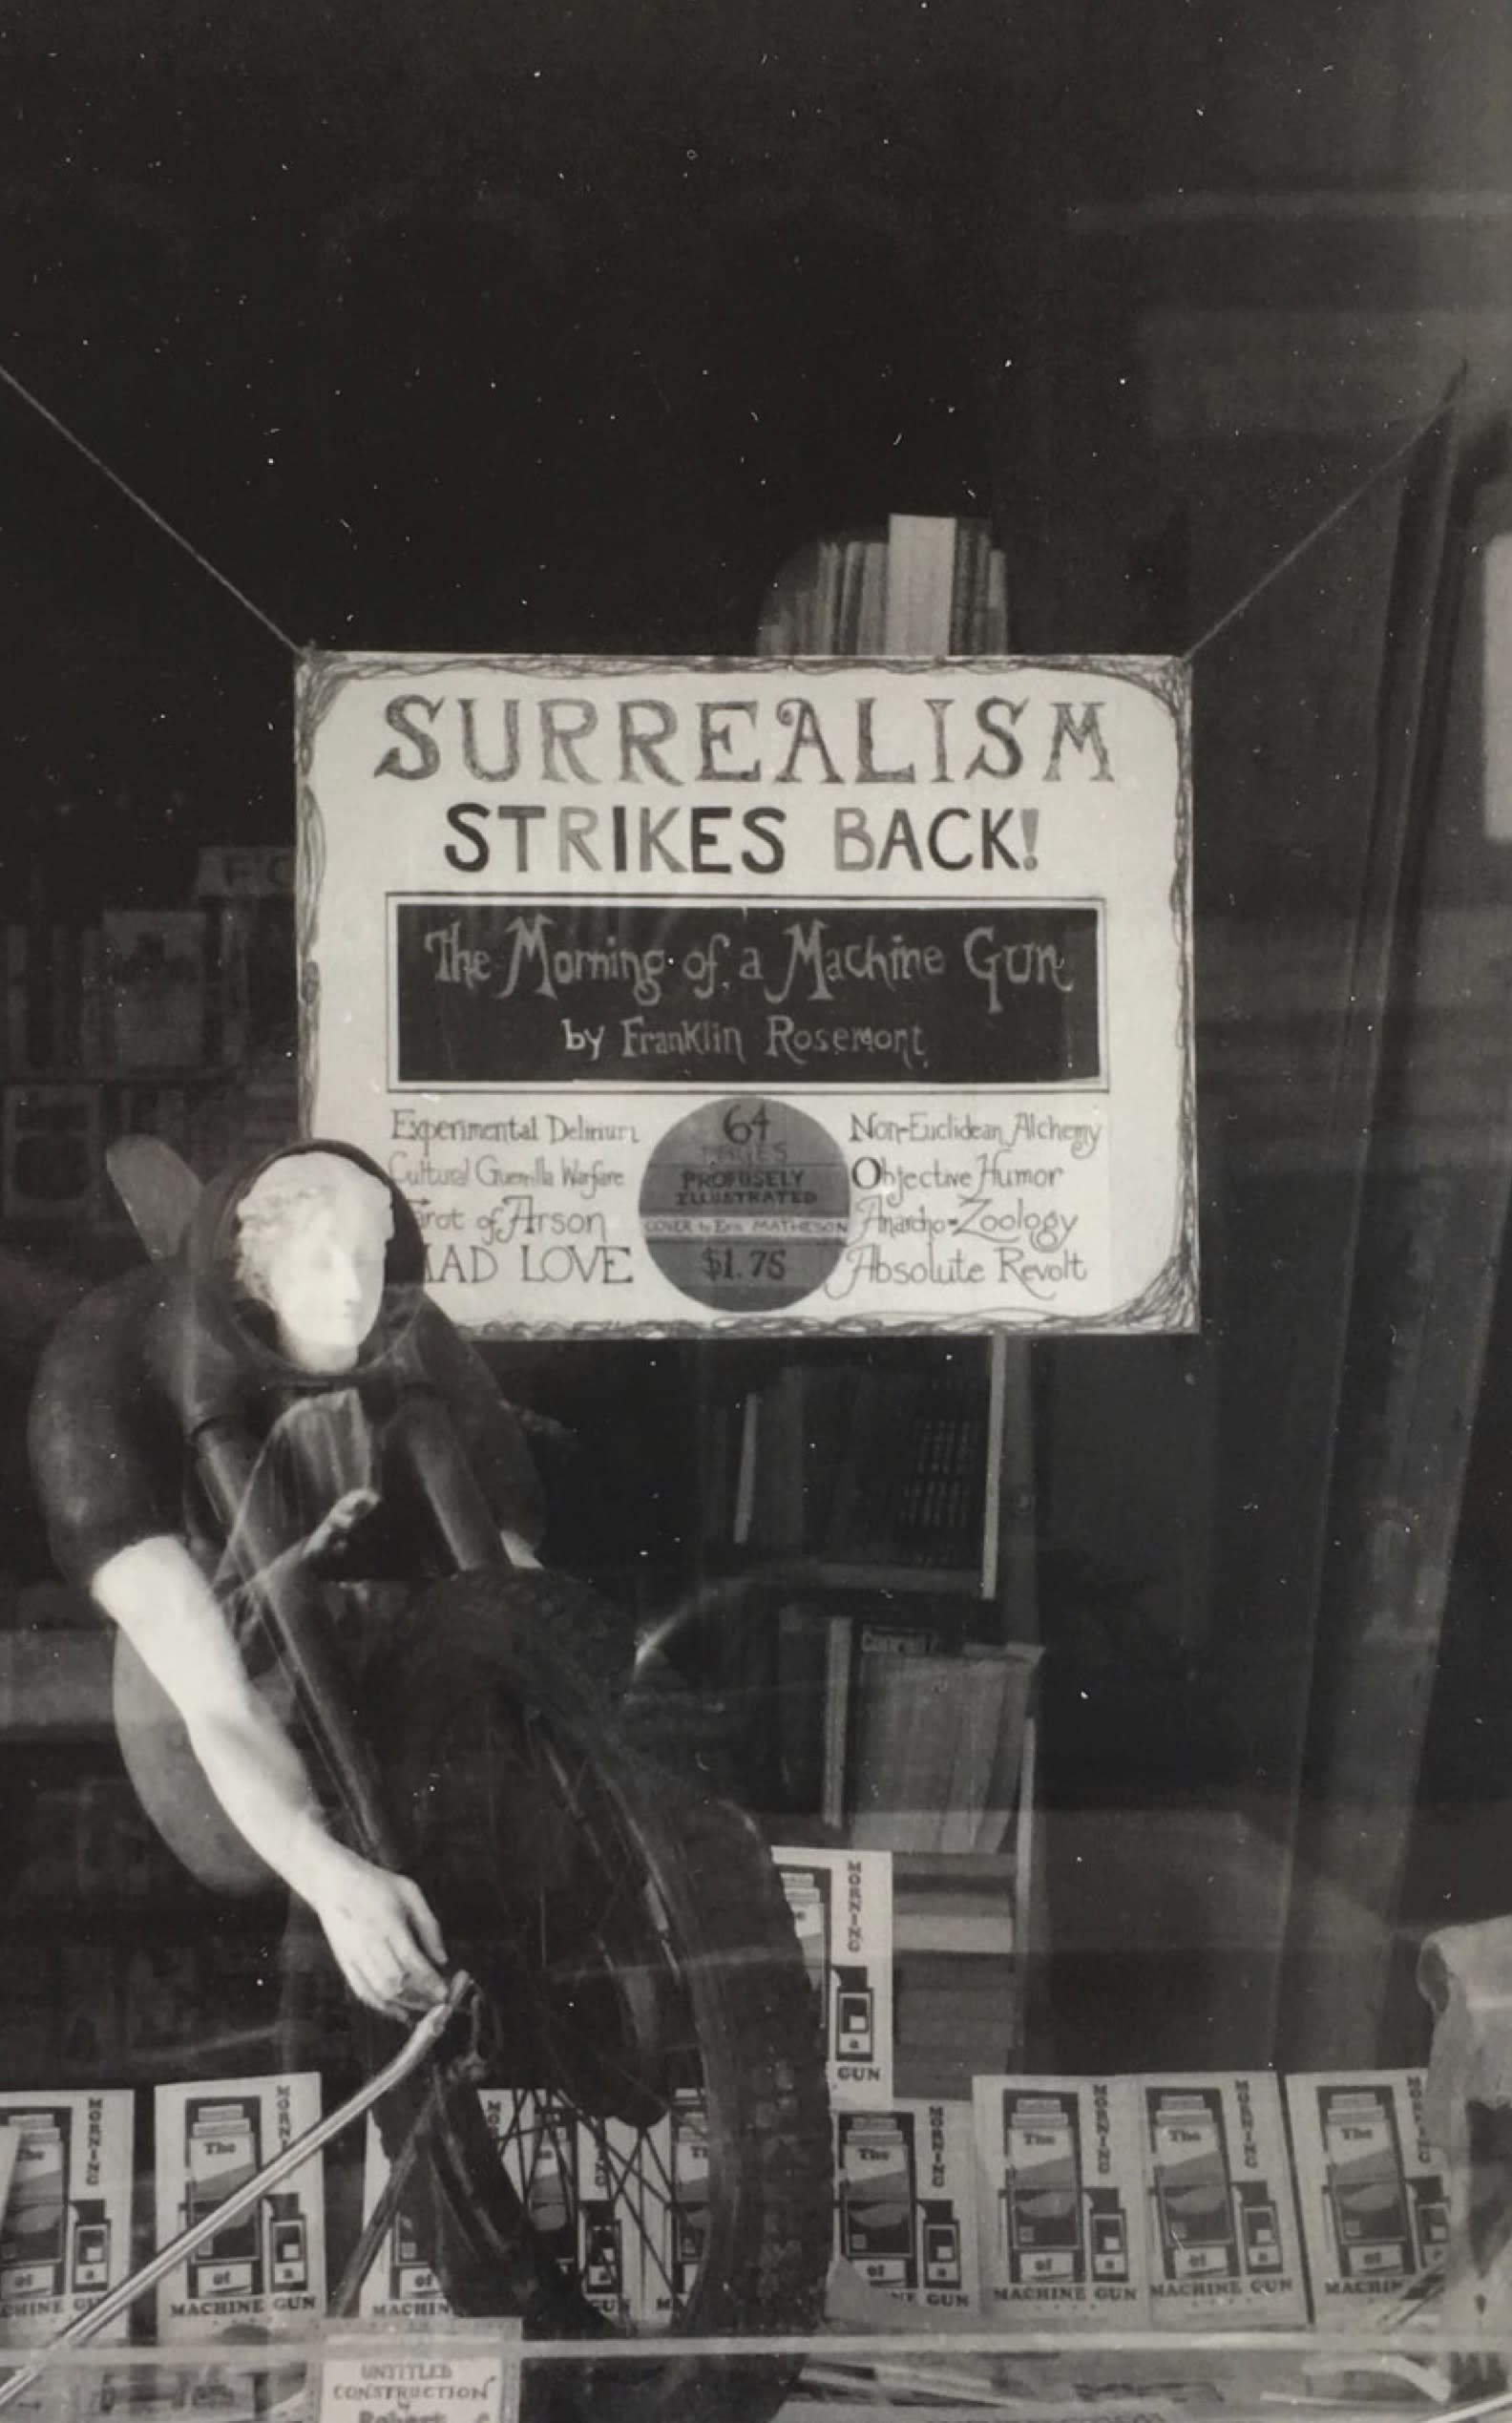 Cover Image for Anarcho-Surrealism in Chicago